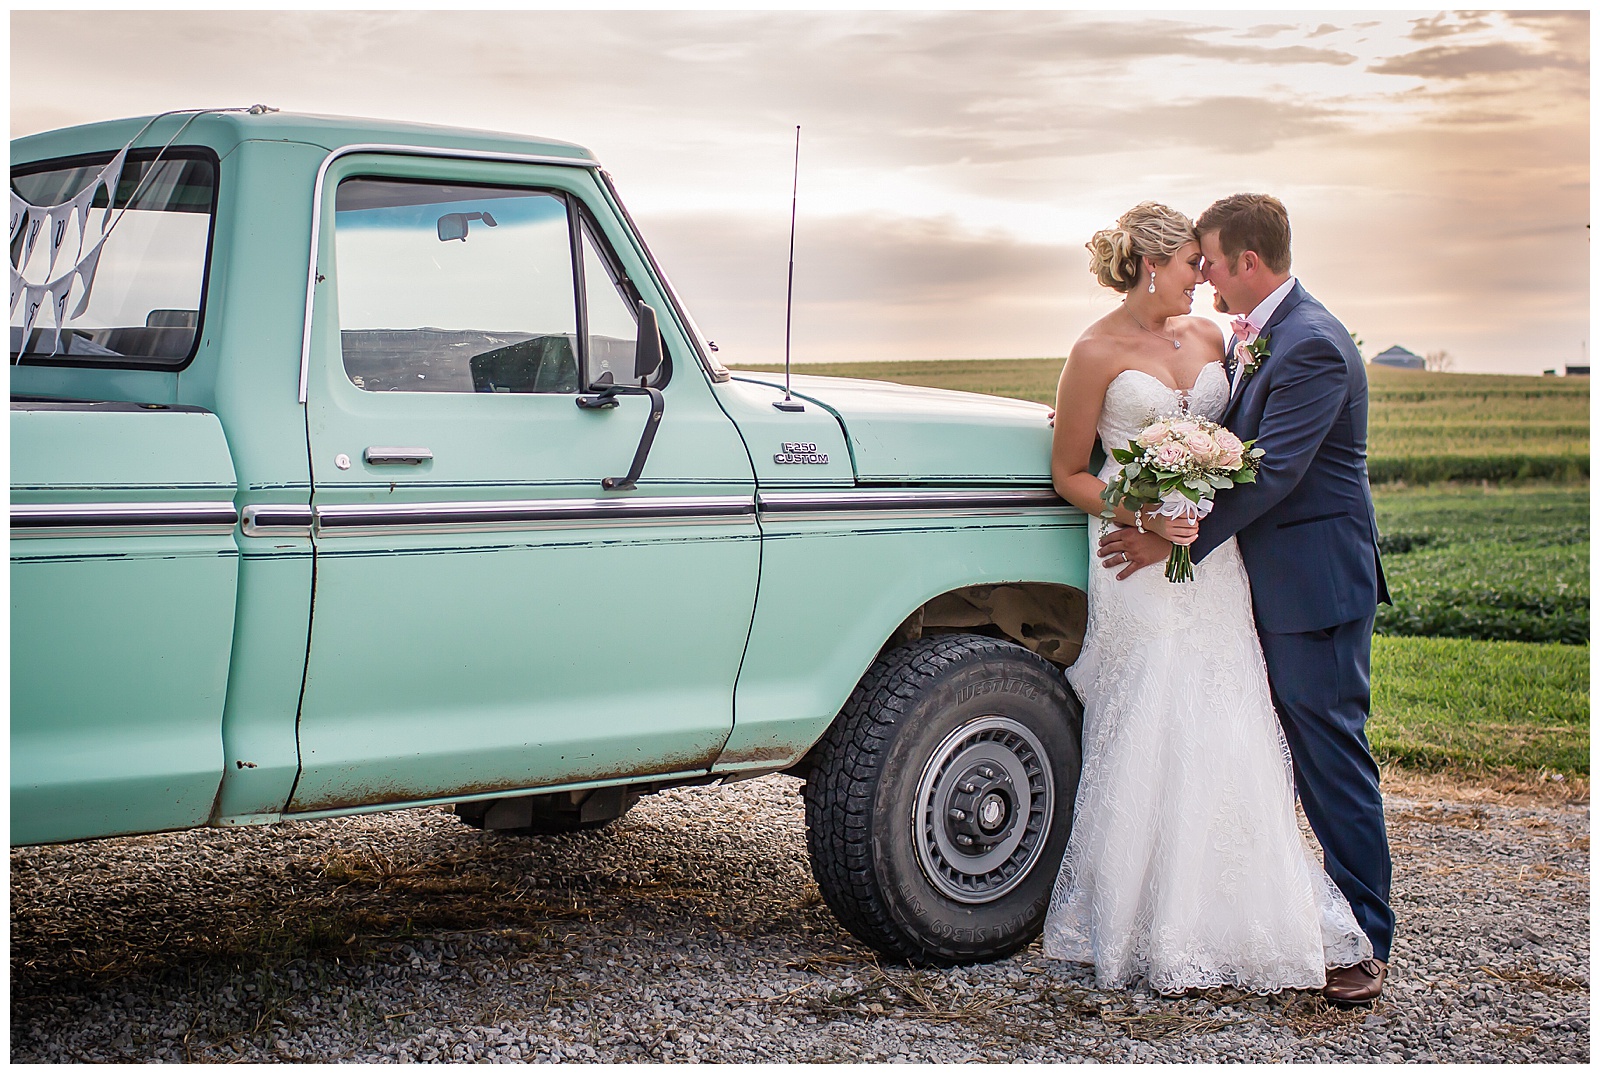 Wedding photography in Lancaster, Kansas, by Kansas City wedding photographers Wisdom-Watson Weddings.